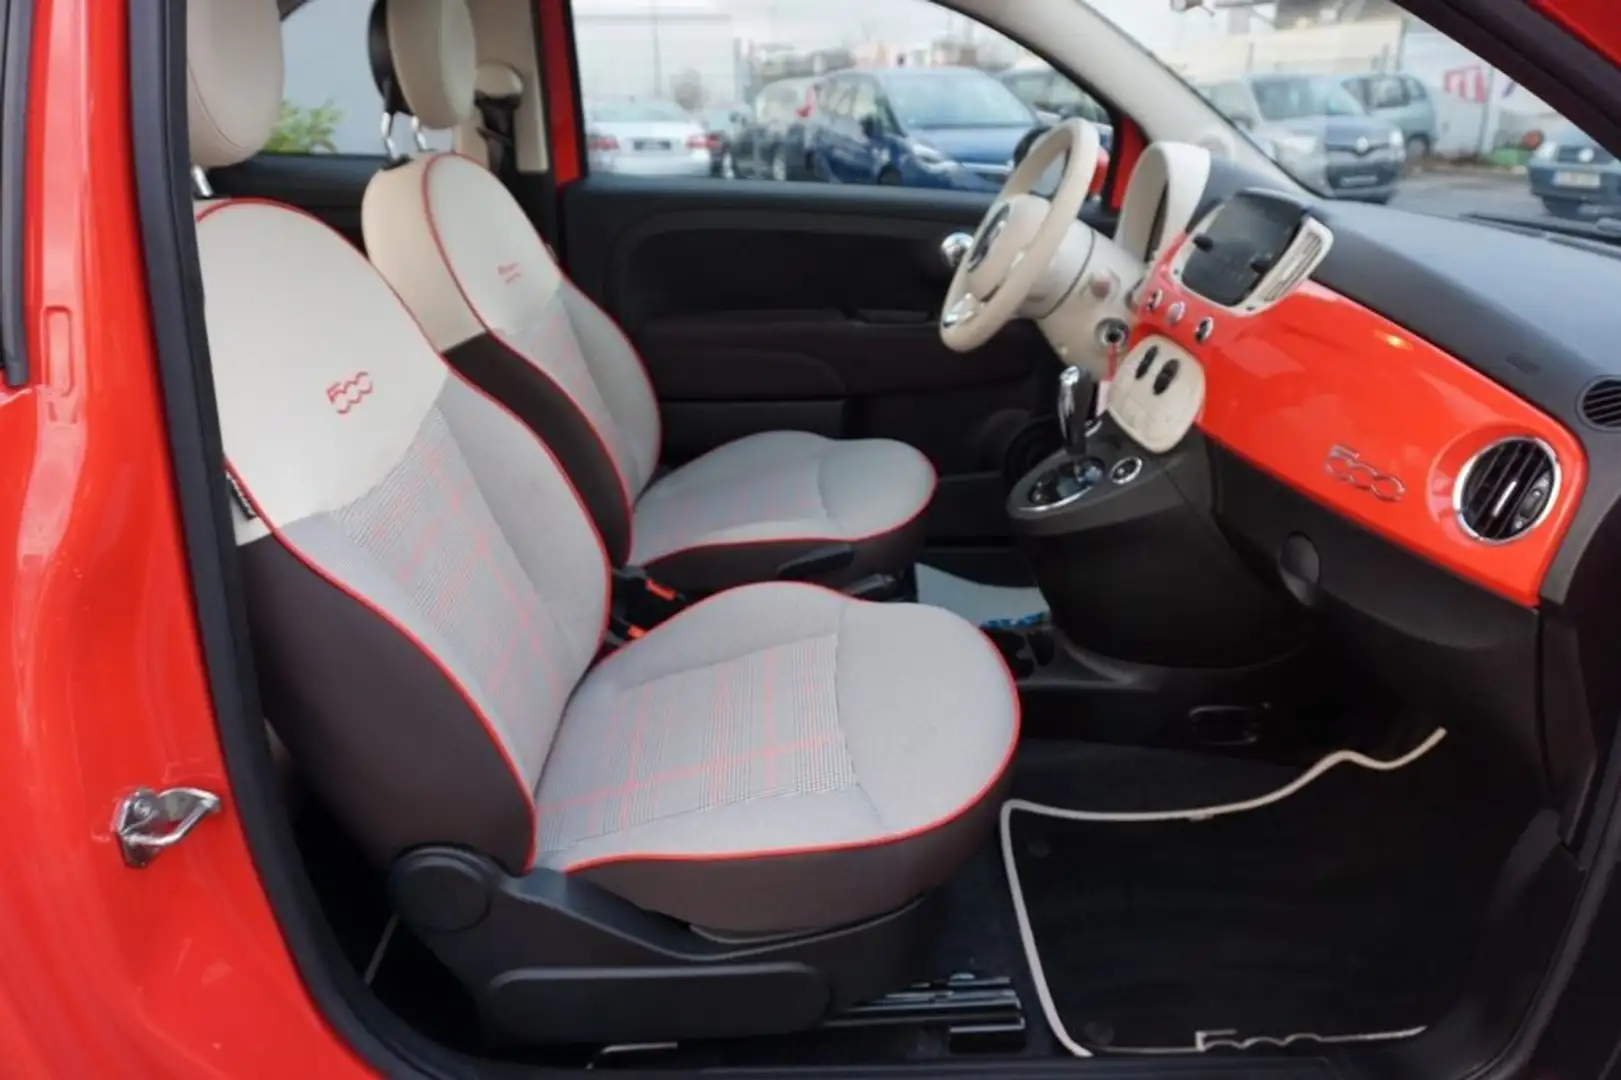 Fiat 500 1.2 Lounge Rosso - 2